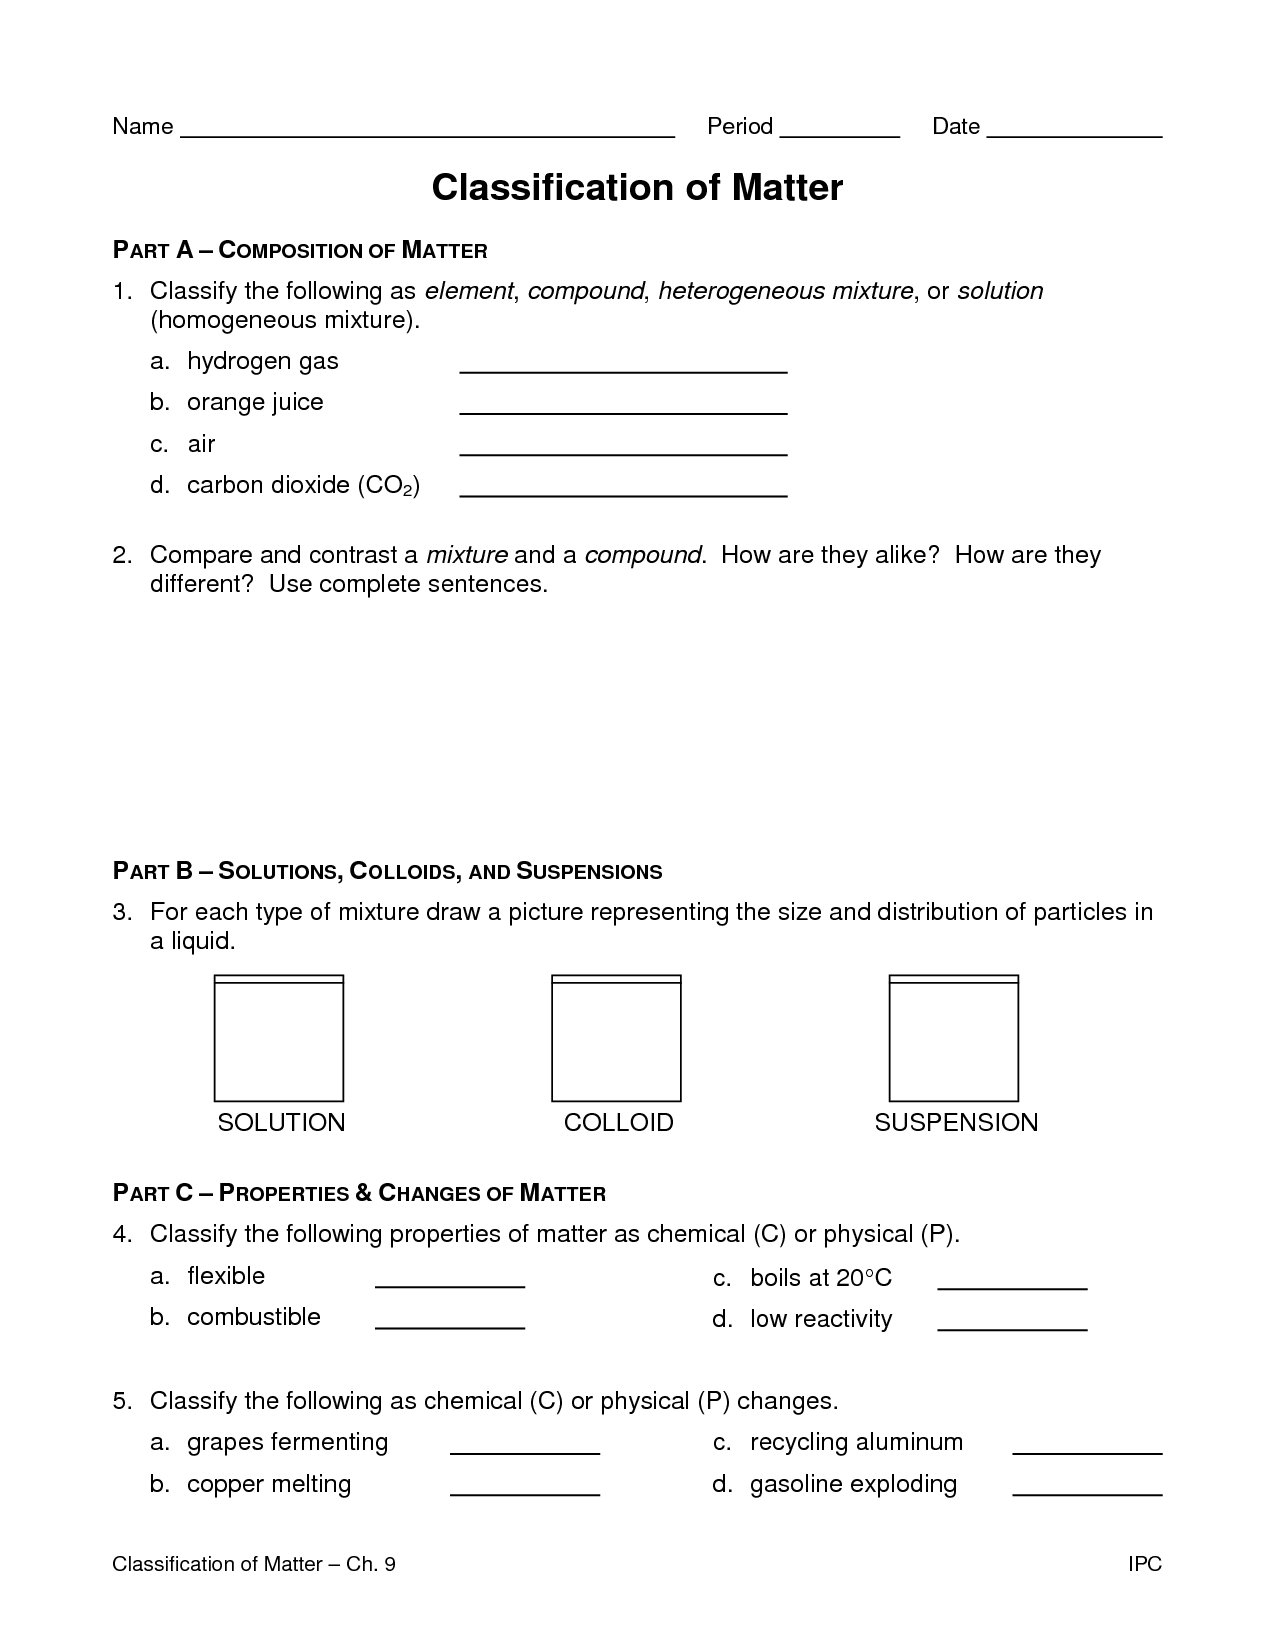 Chemistry 1 Worksheet Classification Of Matter And Changes Answer Pertaining To Classification Of Matter Worksheet Chemistry Answers